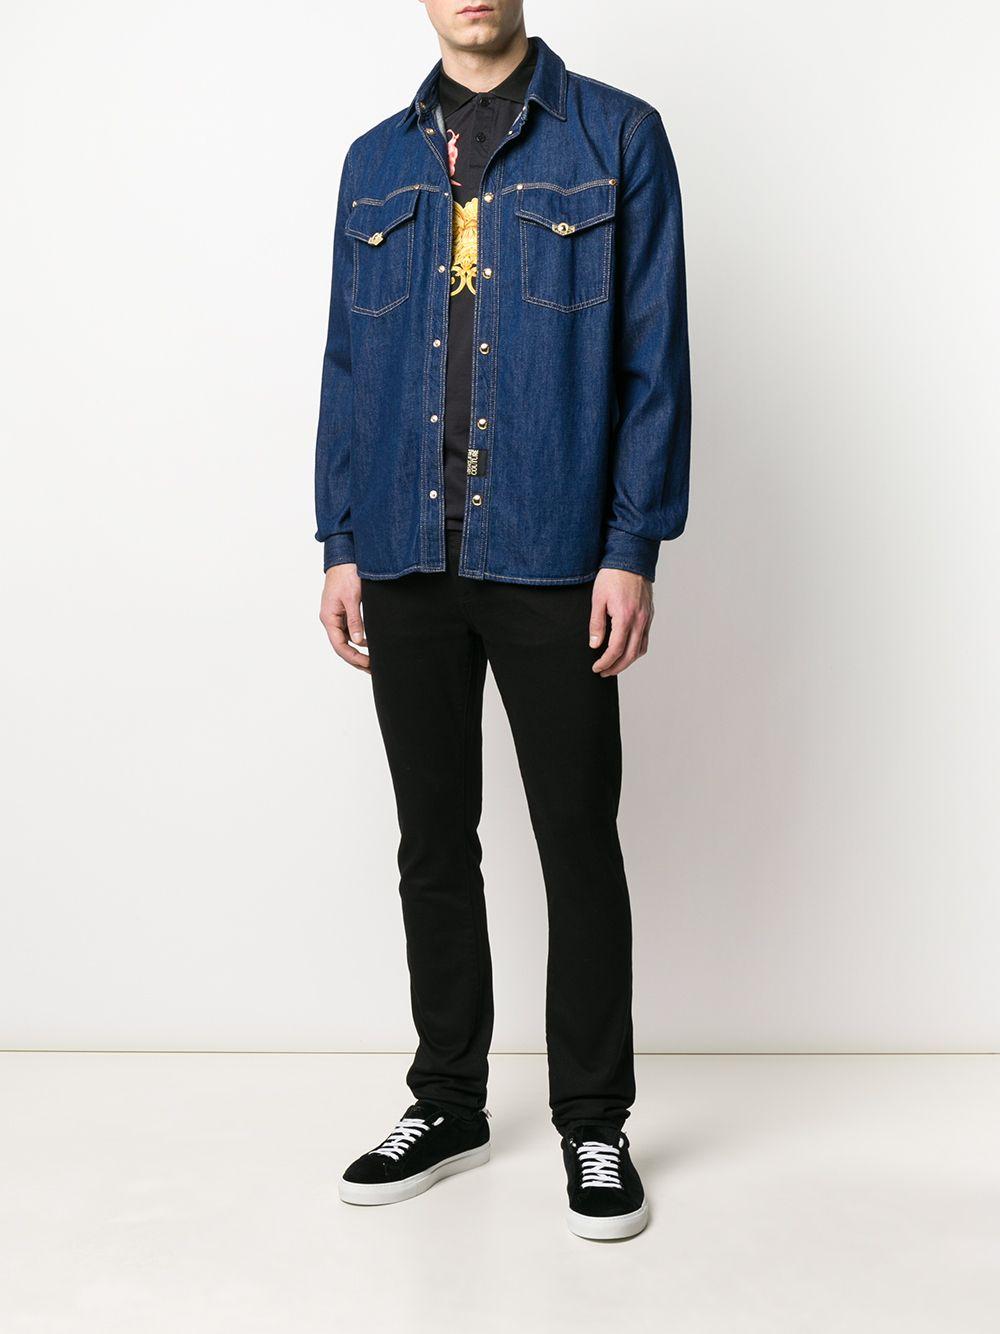 Versace Jeans Couture Denim Long Sleeve Jacket in Blue for Men - Lyst